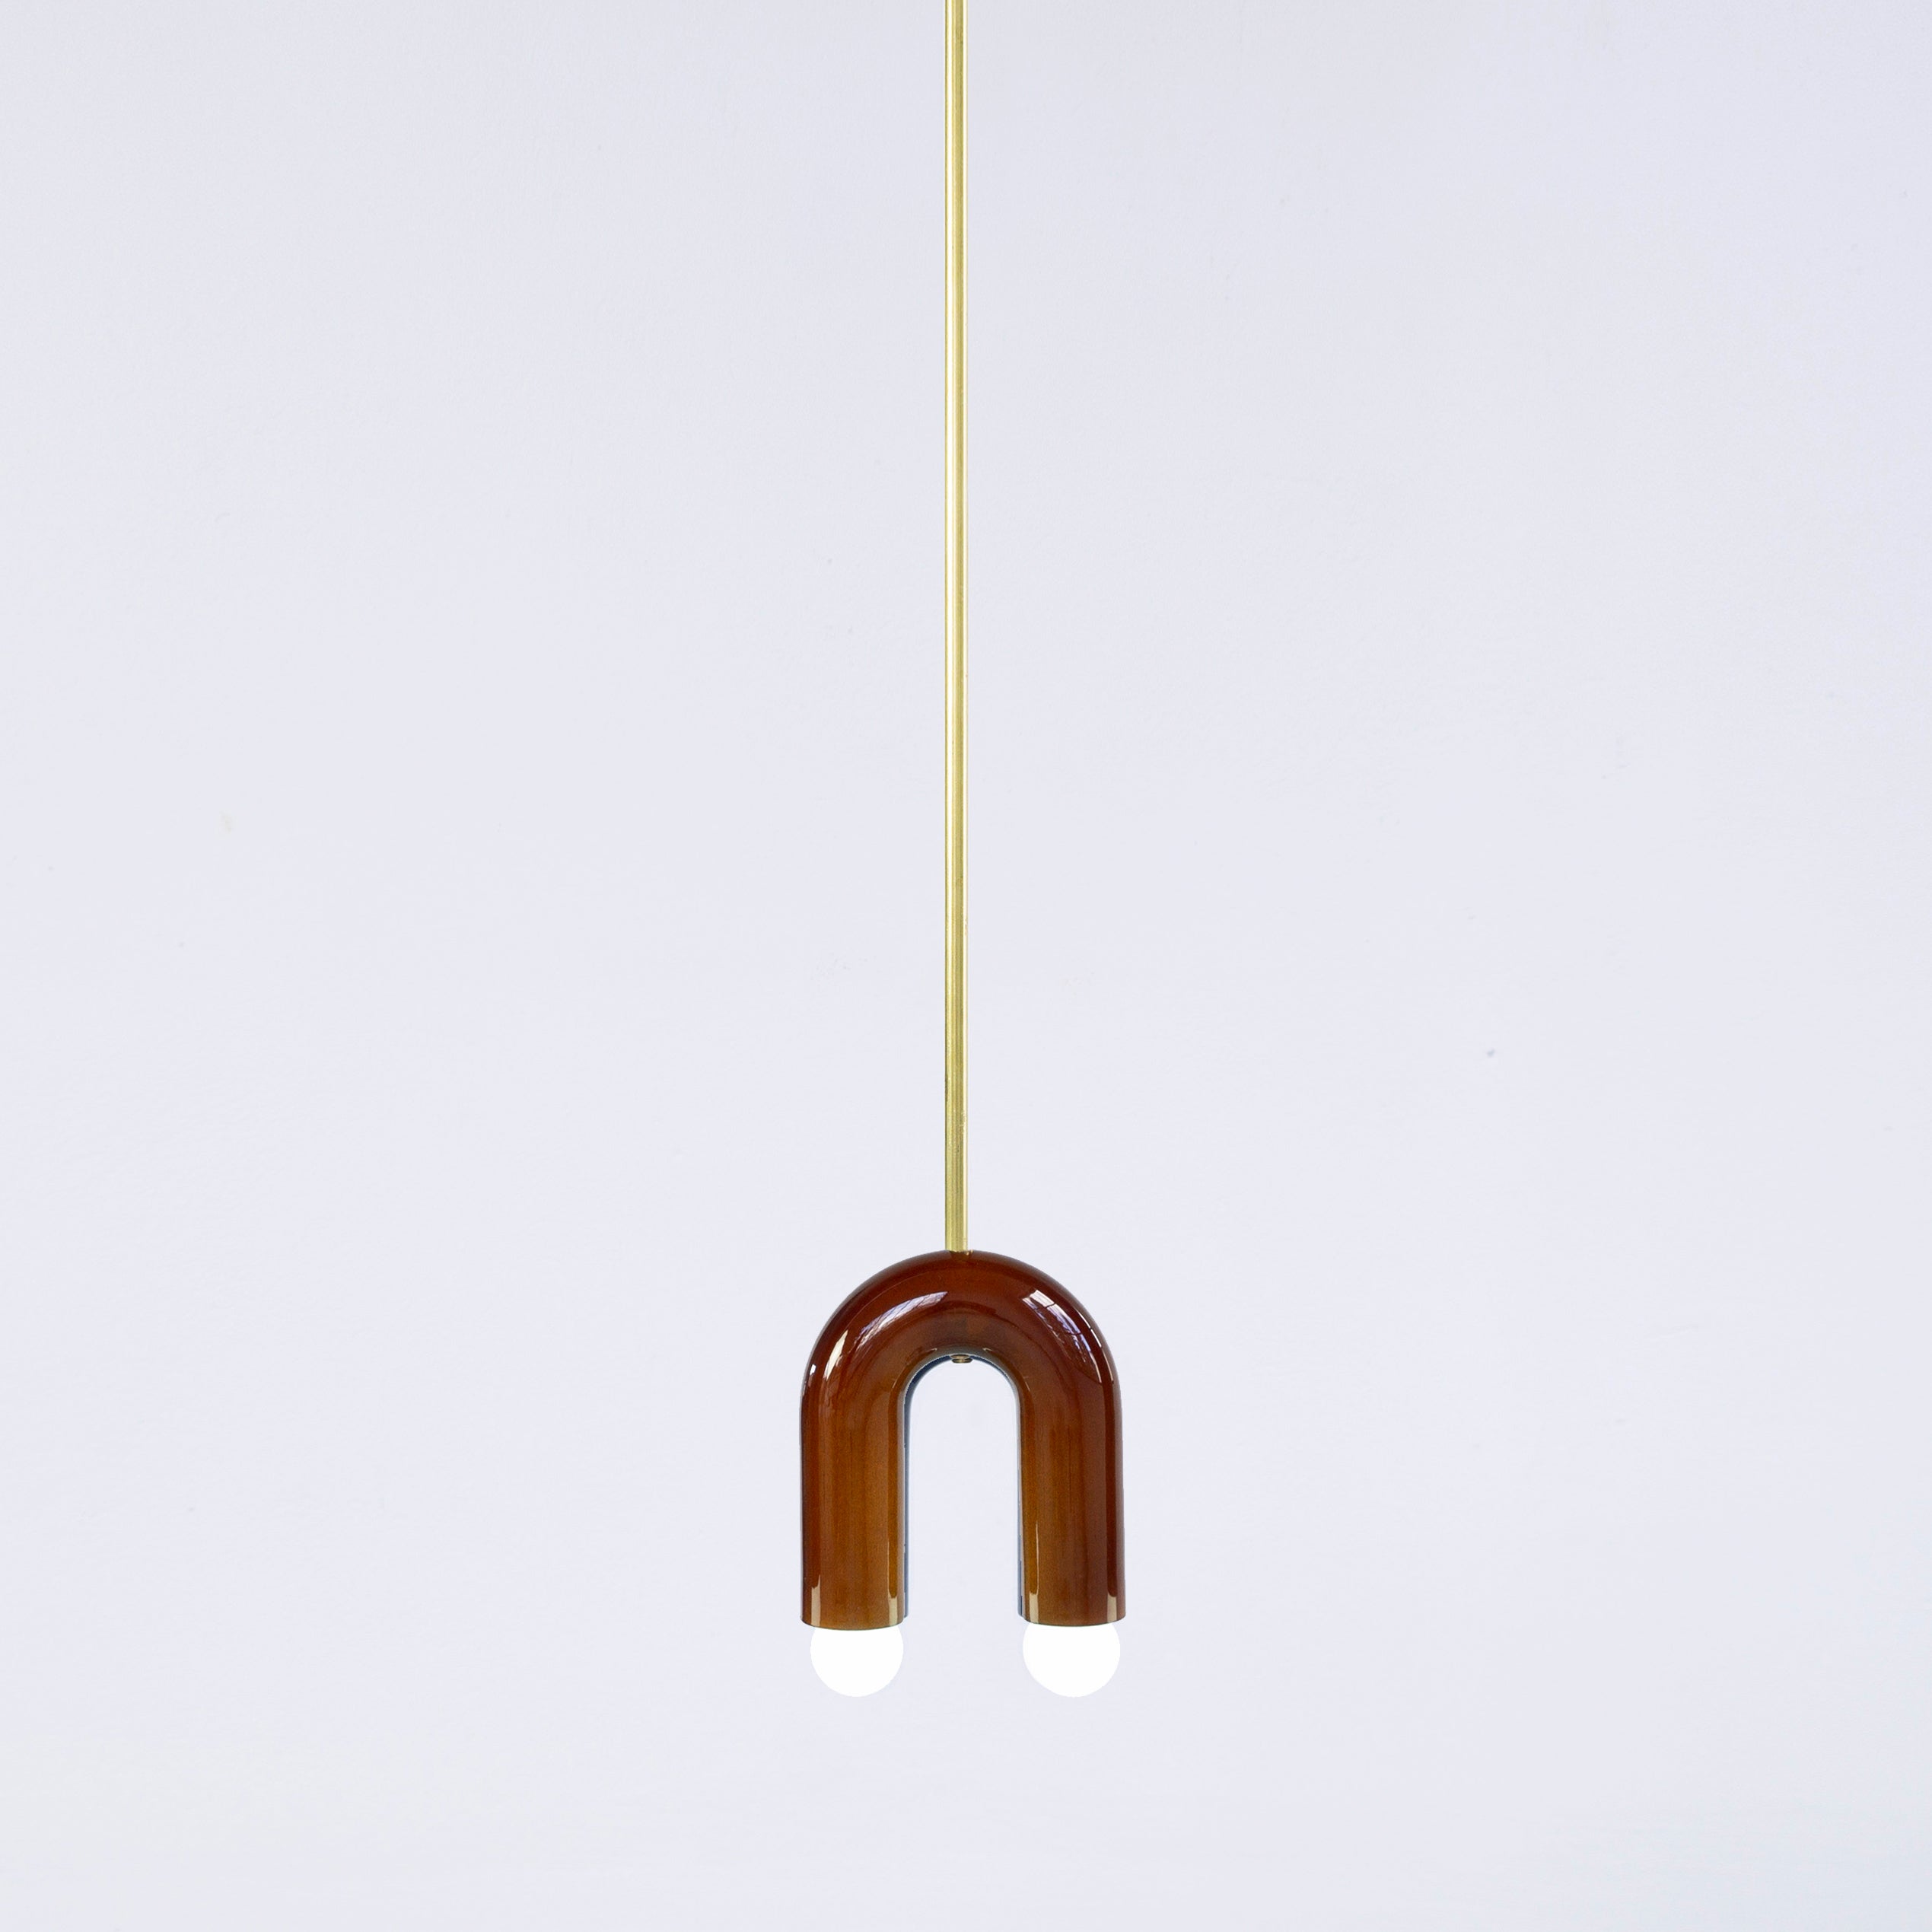 Cobalt TRN A1 pendant lamp by Pani Jurek
Dimensions: D 5 x W 15 x H 18 cm 
Materials: ceramic and brass.
Available in other colors.
Lamps from the TRN collection hang on a metal tube, not on a cable. This allows the lamp to be mounted in a specific